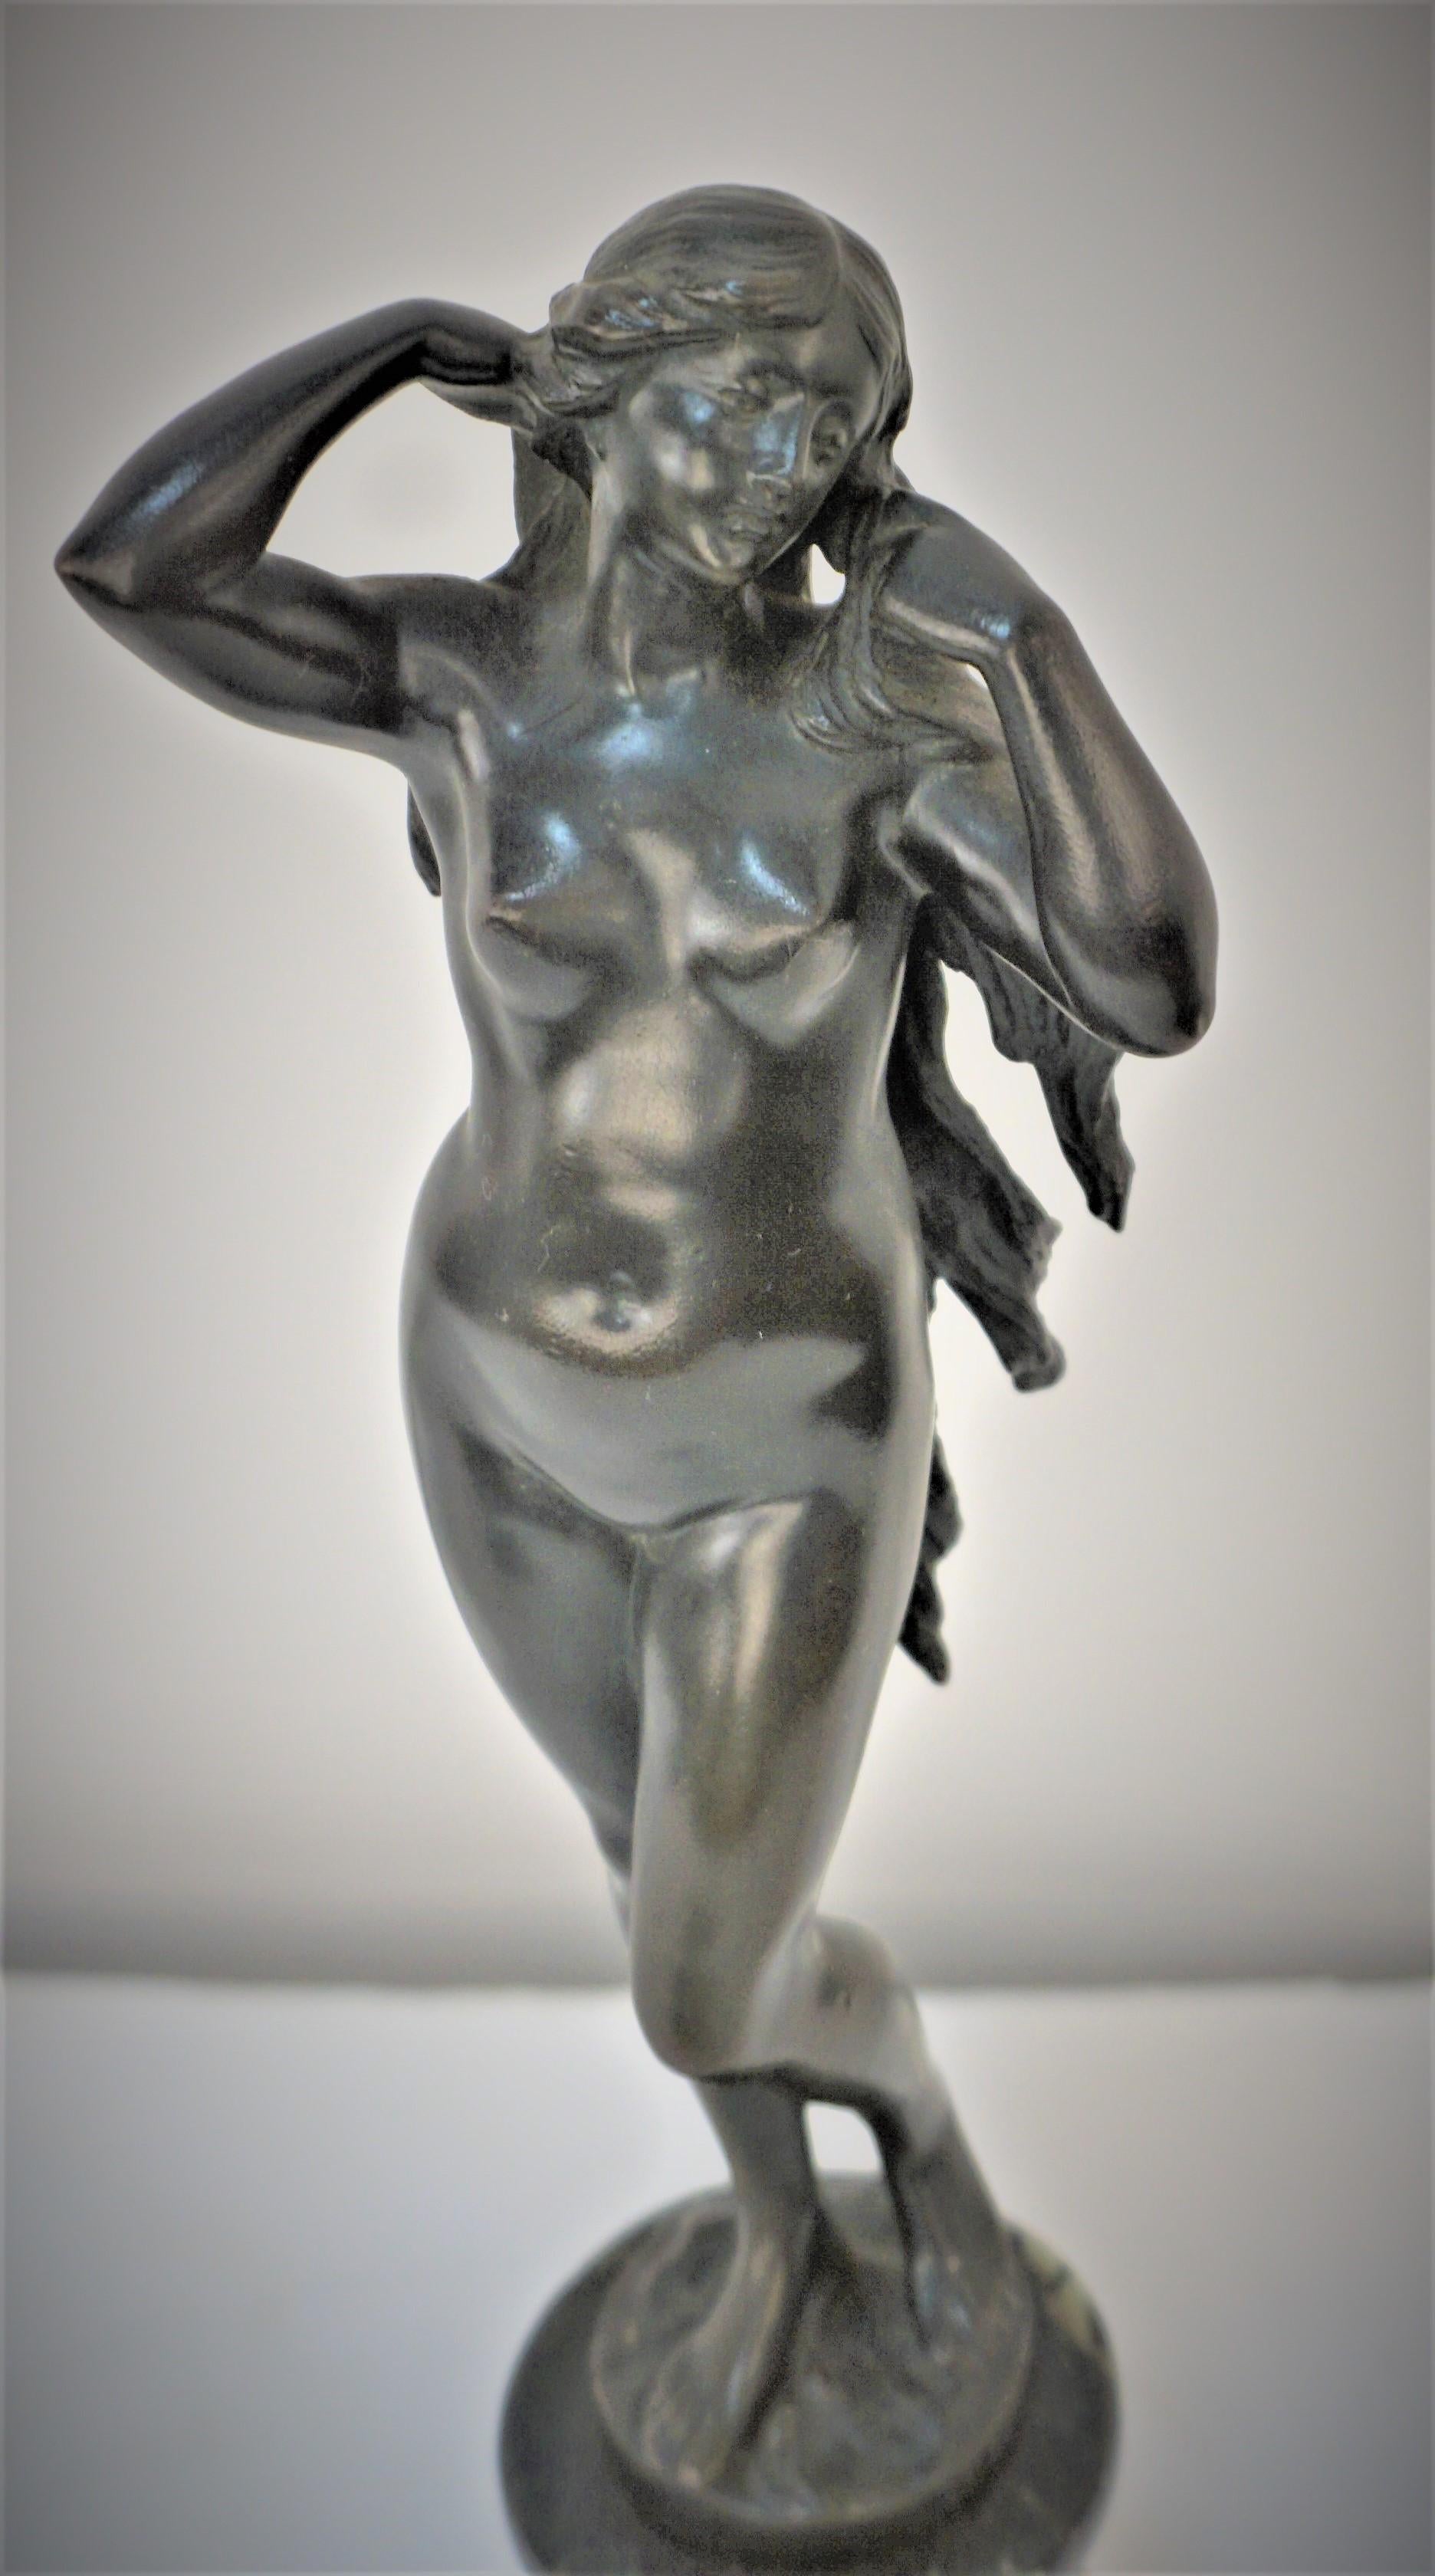 Early 20th century nude sculptural bronze with long hair over marble stand by Stephen Schwartz (1851-1924)